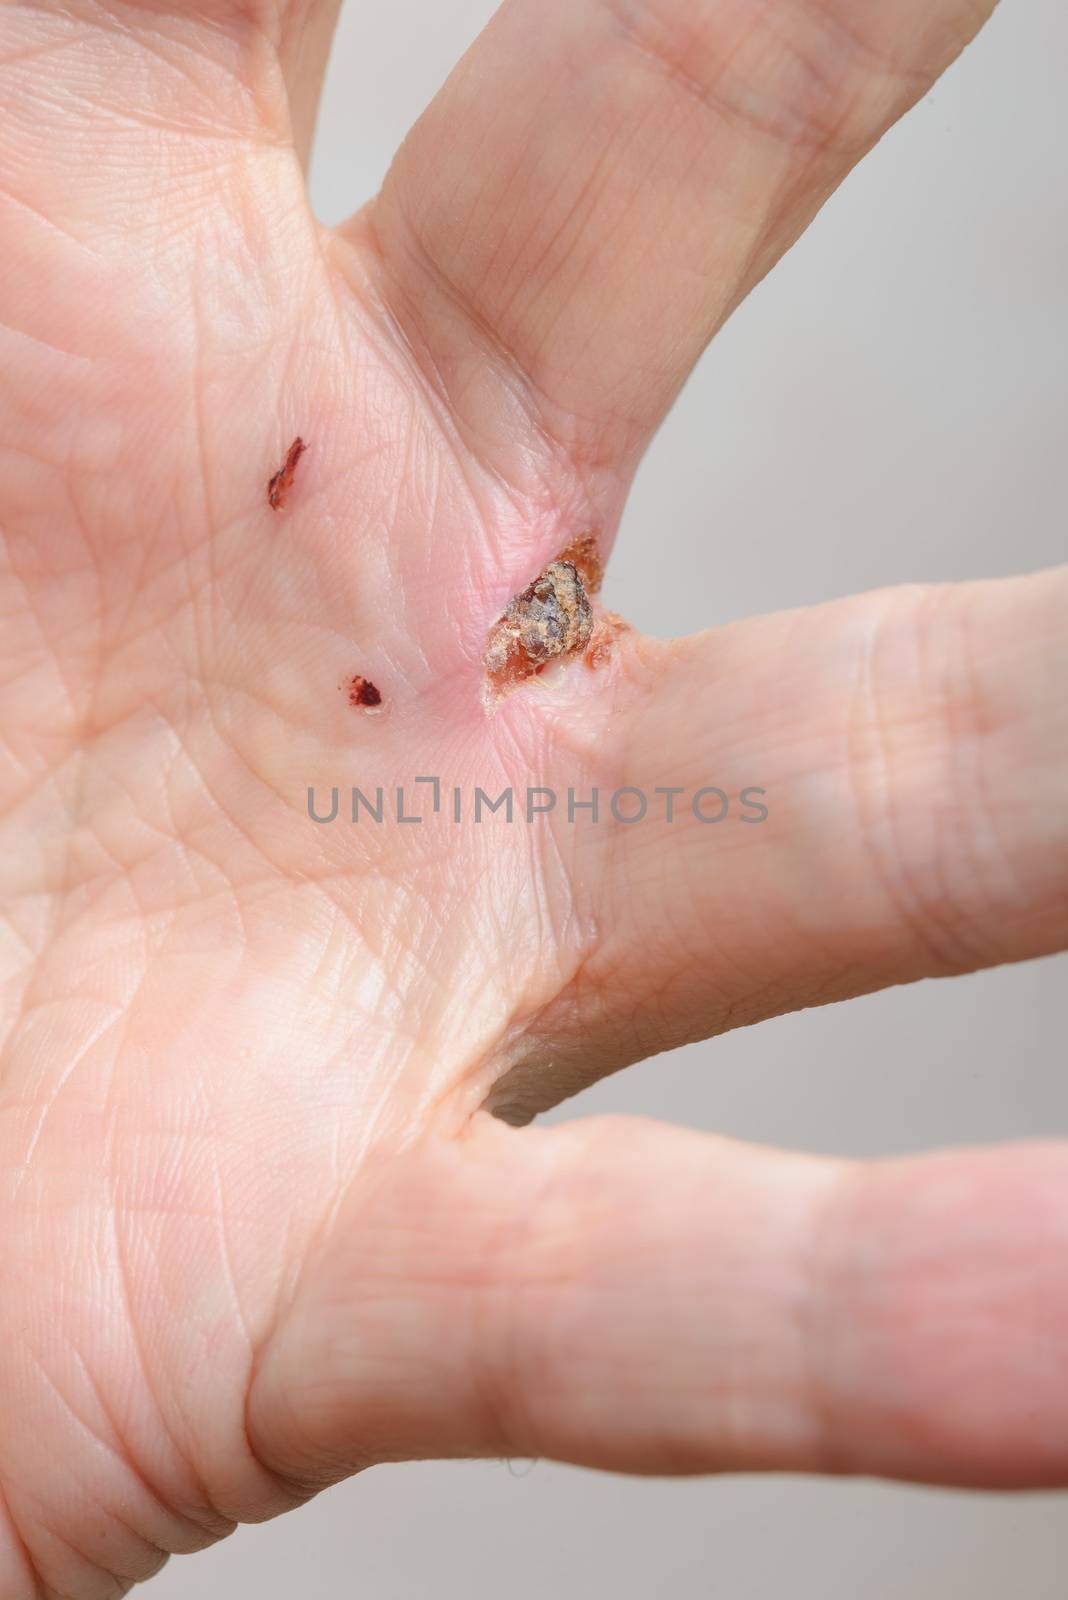 Man injured by dog bites in the hand. The deep wound left by the fangs between the fingers are obvious.